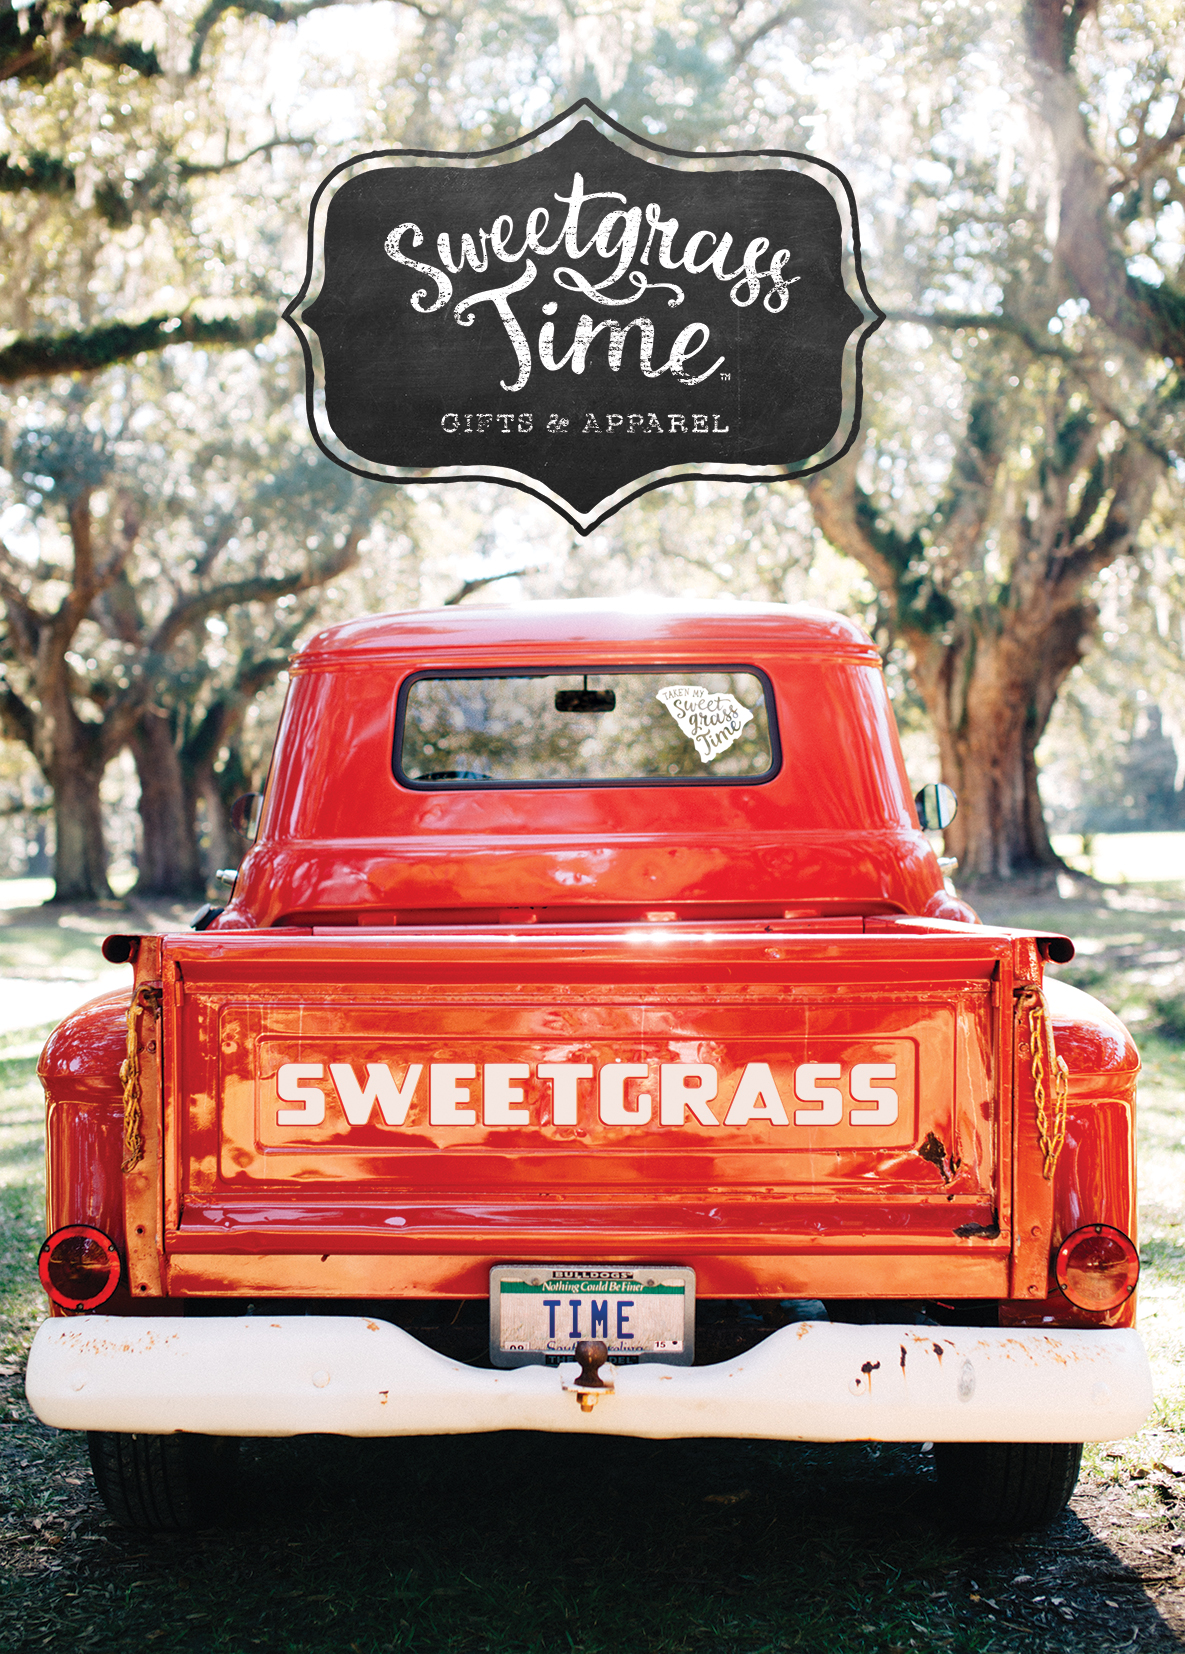 Sweetgrass Time on a red 1955 Chevy Truck